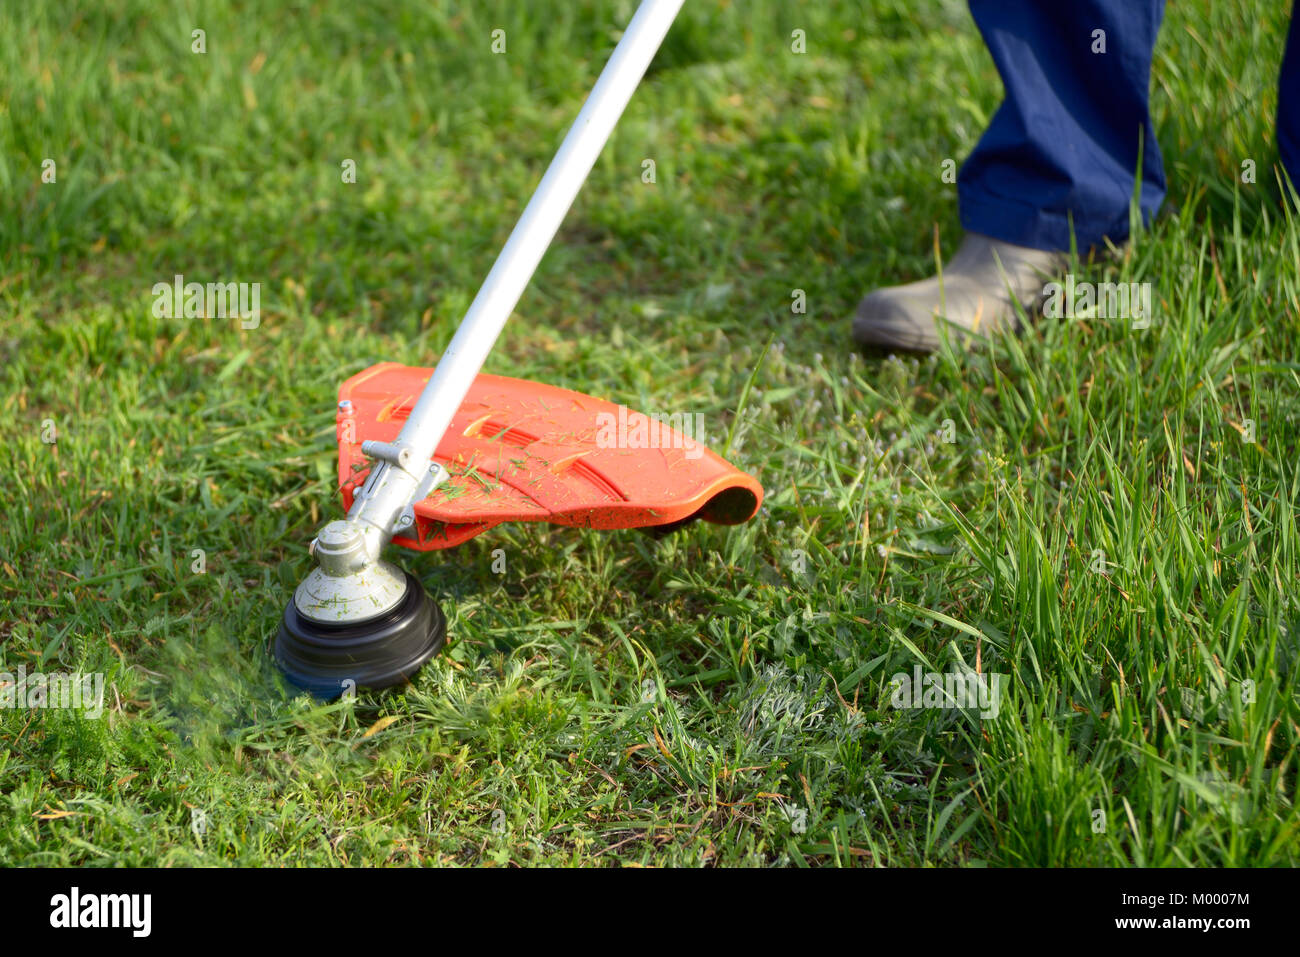 Mowing the grass on the lawn closeup Stock Photo